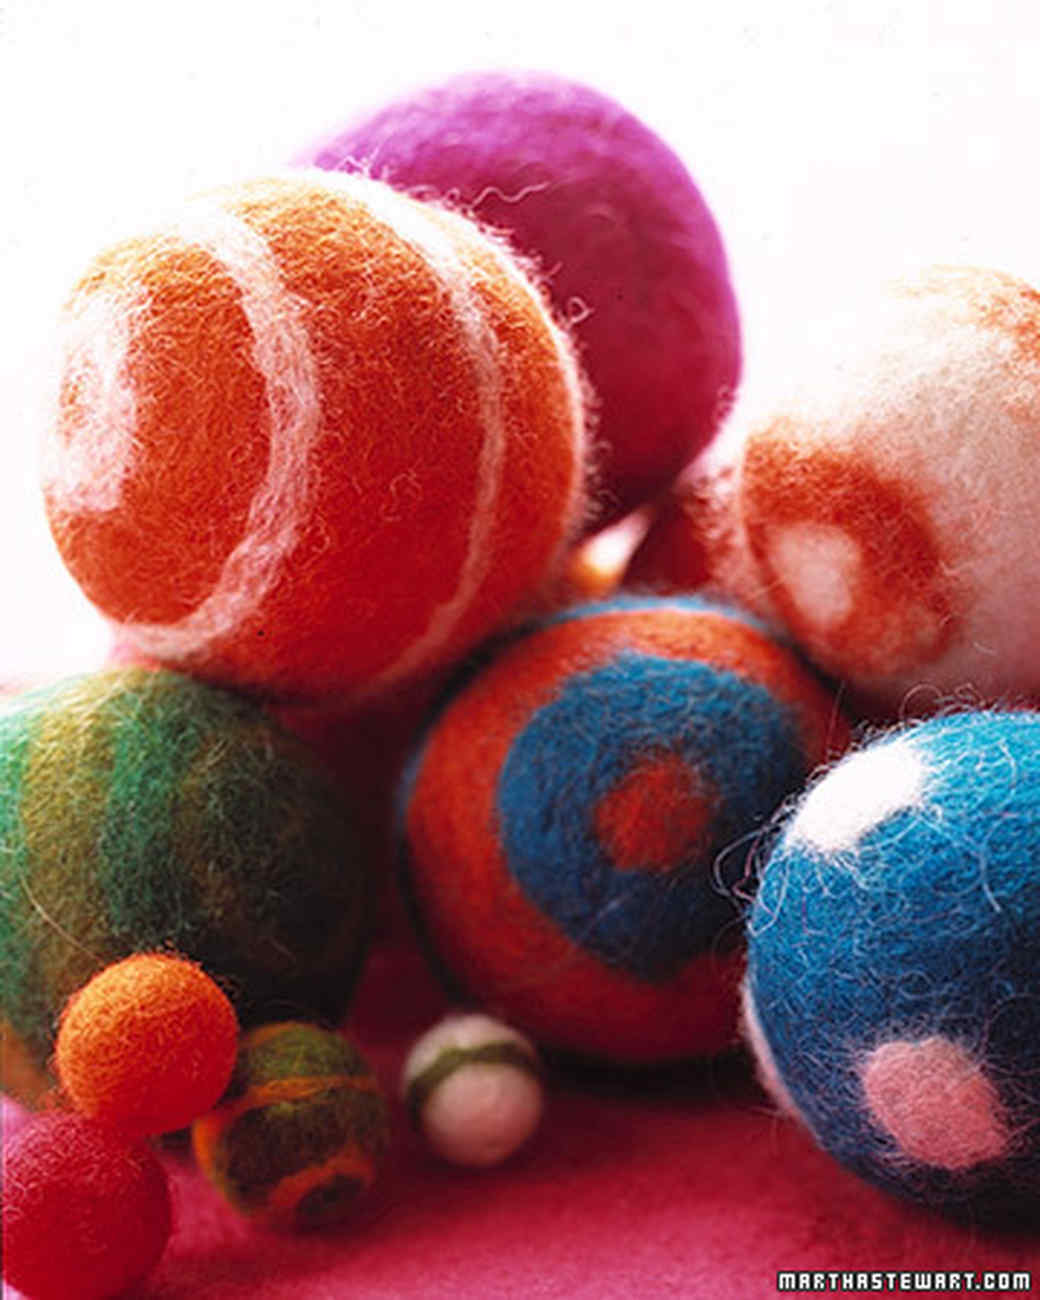 felted wool balls for sale